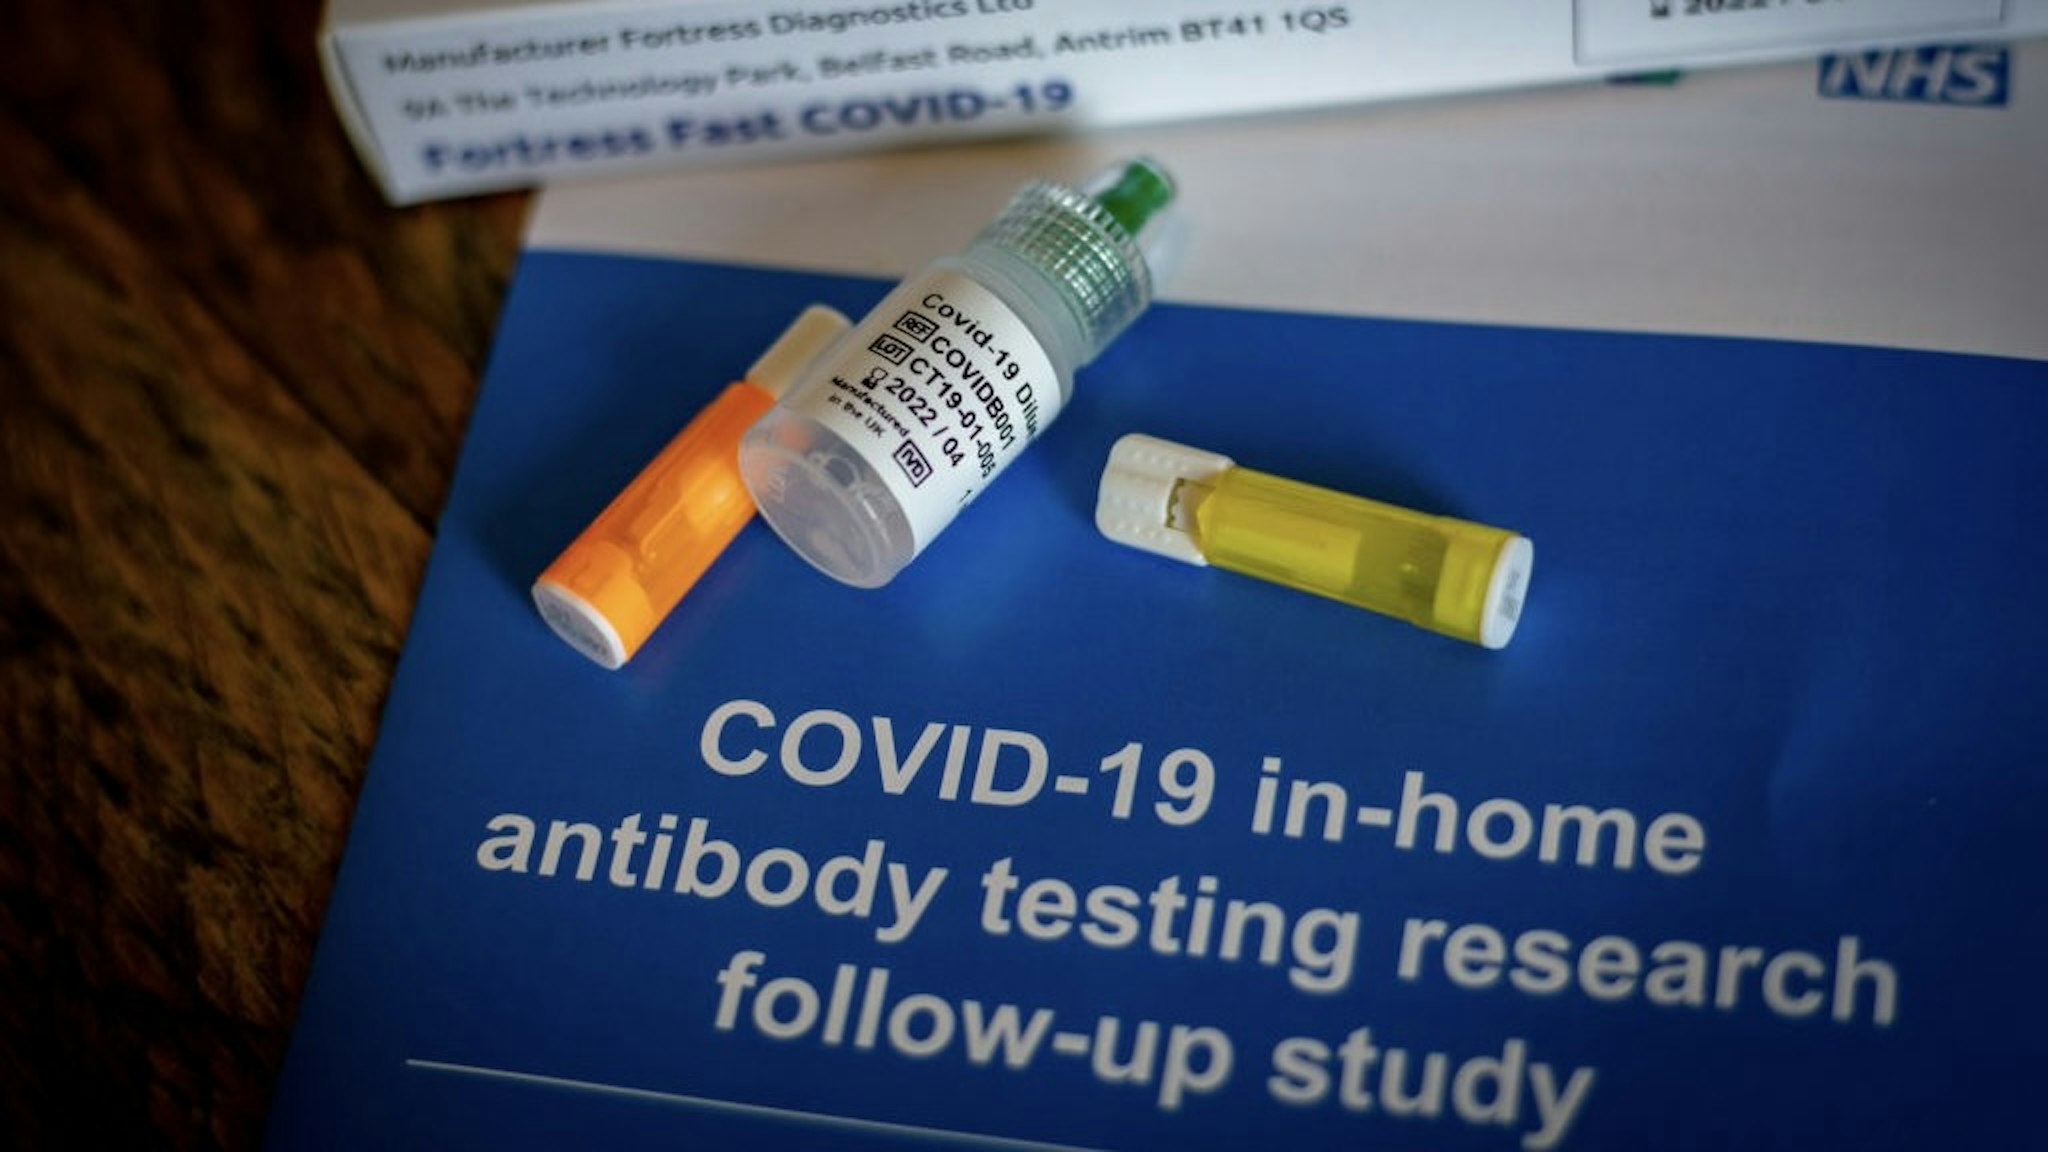 COVID-19 Home Antibody Testing Kit As U.K. Cases Soar A vial of COVID-19 diluent buffer liquid, center, and two lancets, part of a COVID-19 in-home antibody testing kit, manufactured by Fortress Diagnostics Ltd., sit in this arranged photograph in London, U.K., on Tuesday, Sept. 15, 2020. A new restriction on gatherings to no more than six people both indoors and outdoors started in the U.K. on Monday as coronavirus cases rose sharply and a prominent scientist warned of future lockdowns. Photographer: Gem Atkinson/Bloomberg via Getty Images Bloomberg / Contributor